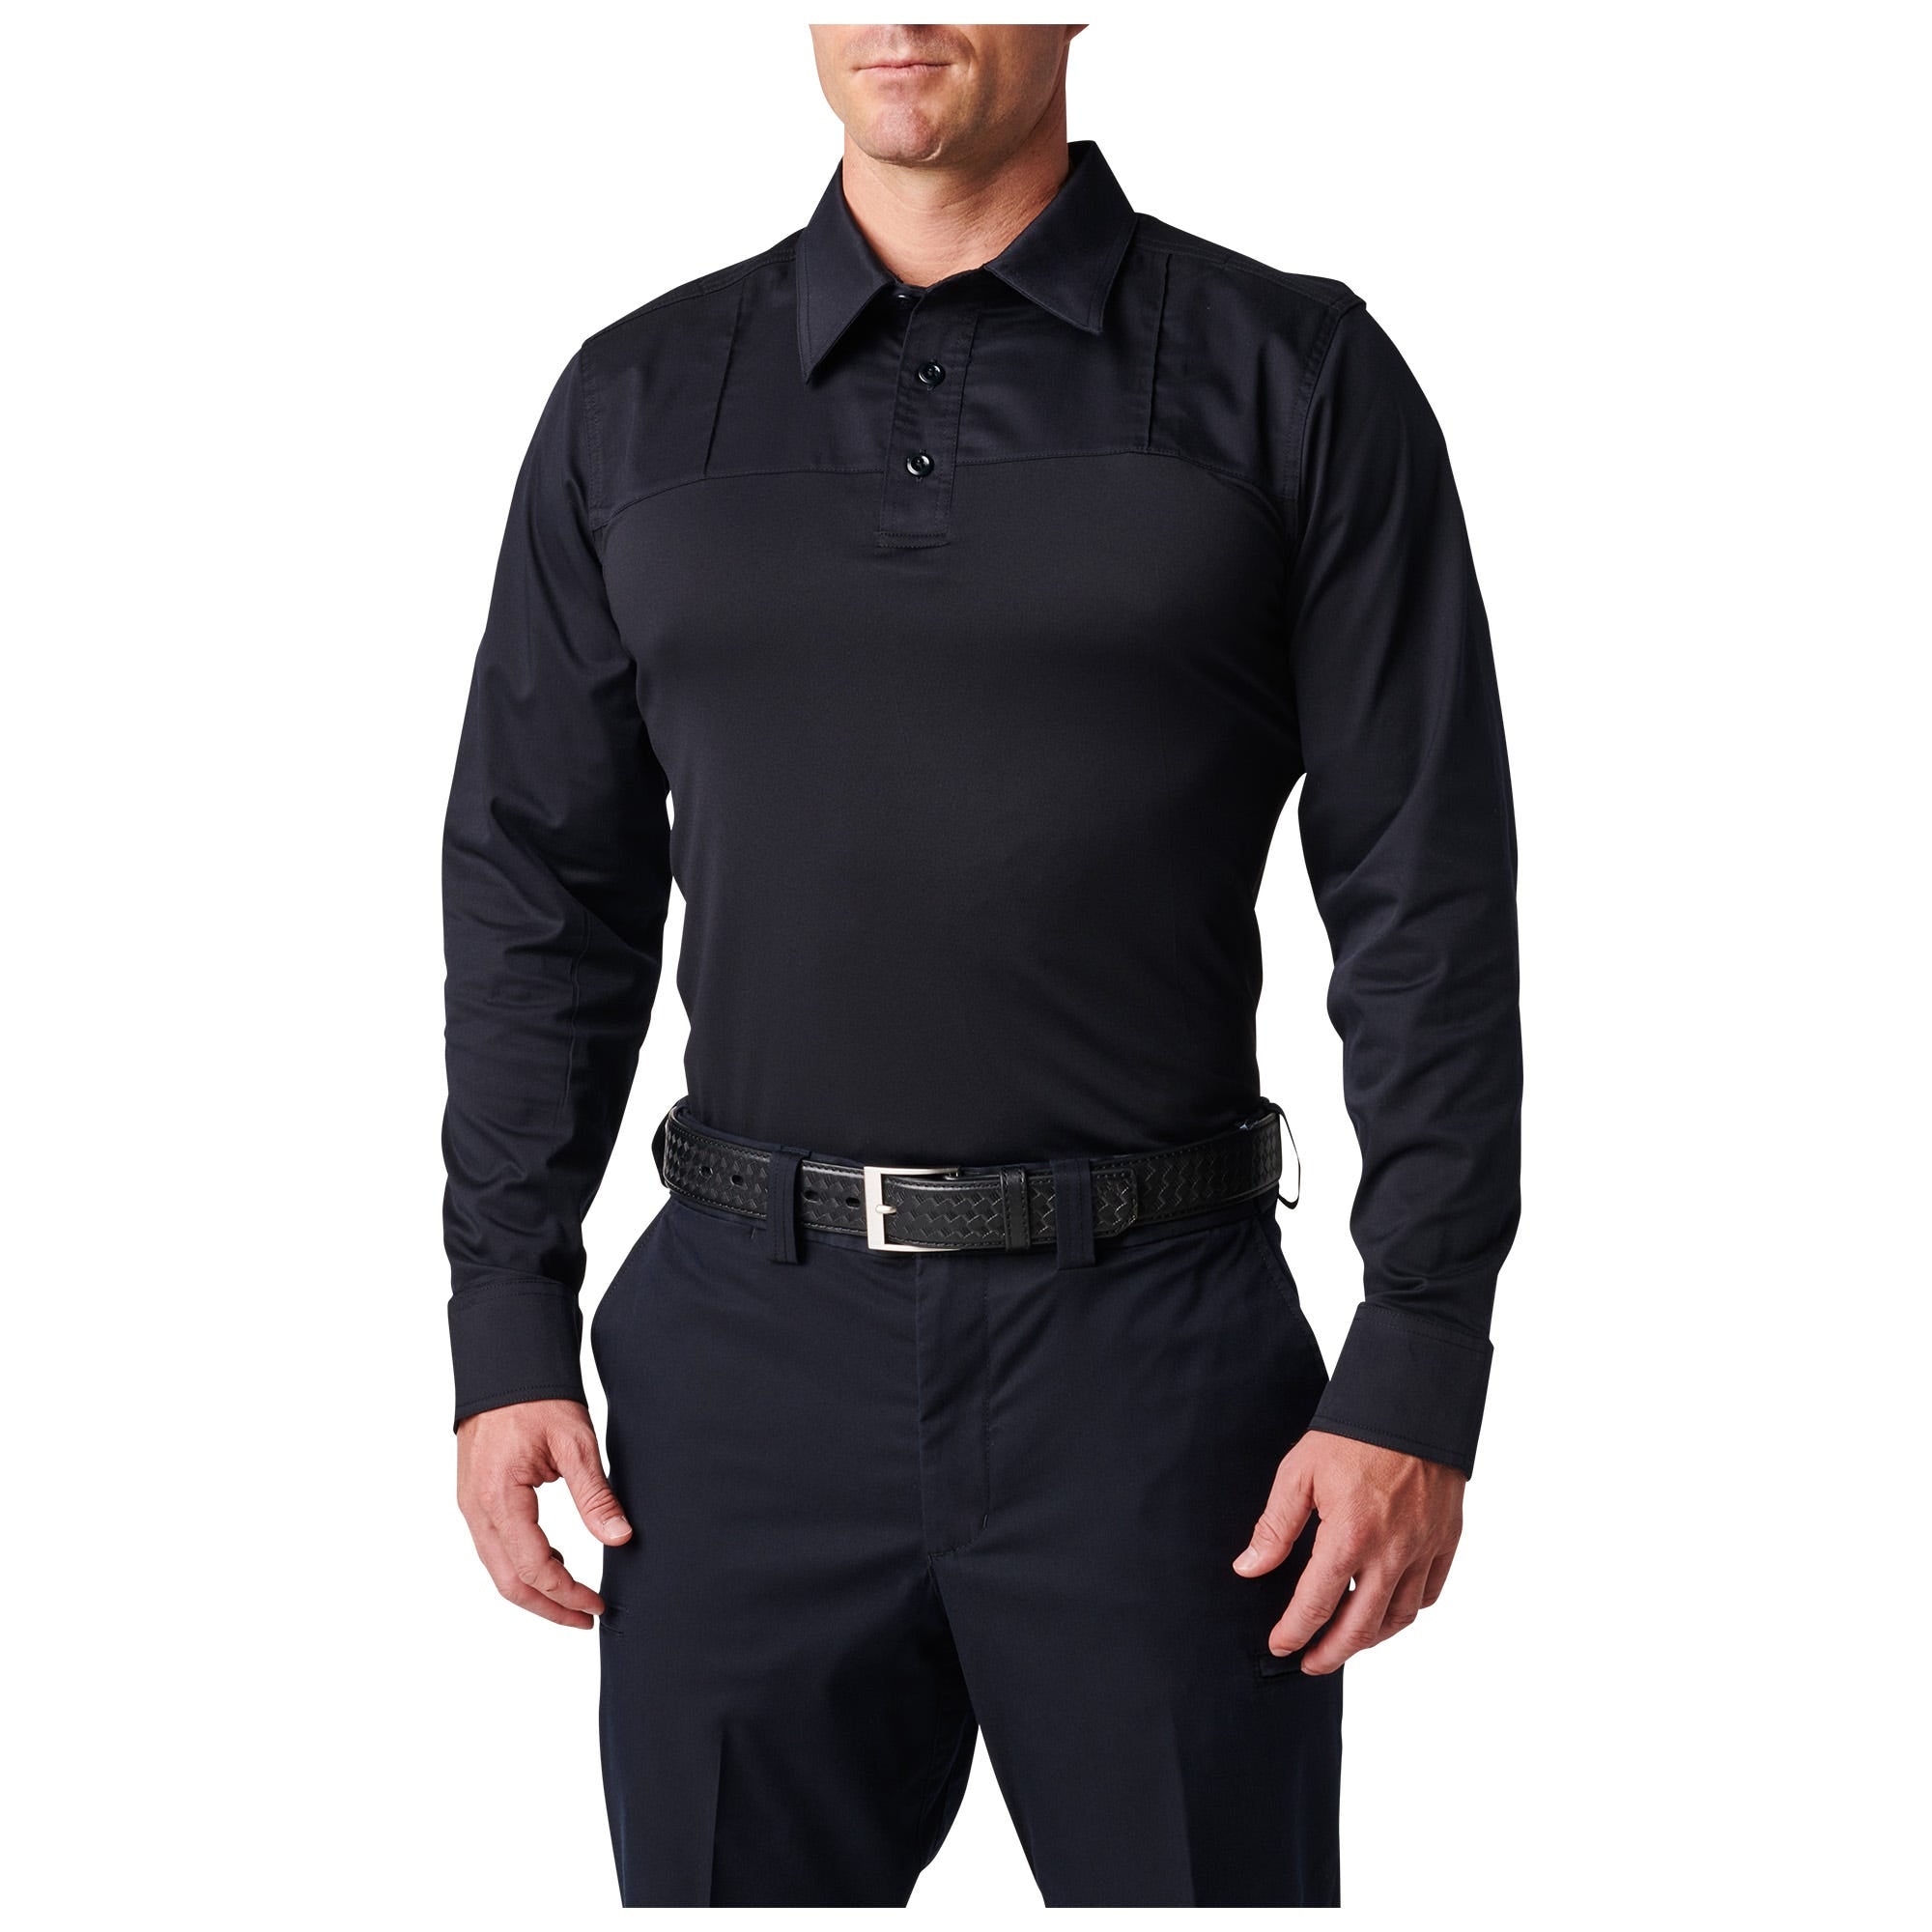 5.11 Tactical Stryke PDU Twill Rapid Long Sleeve Shirt 72547 - Clothing & Accessories